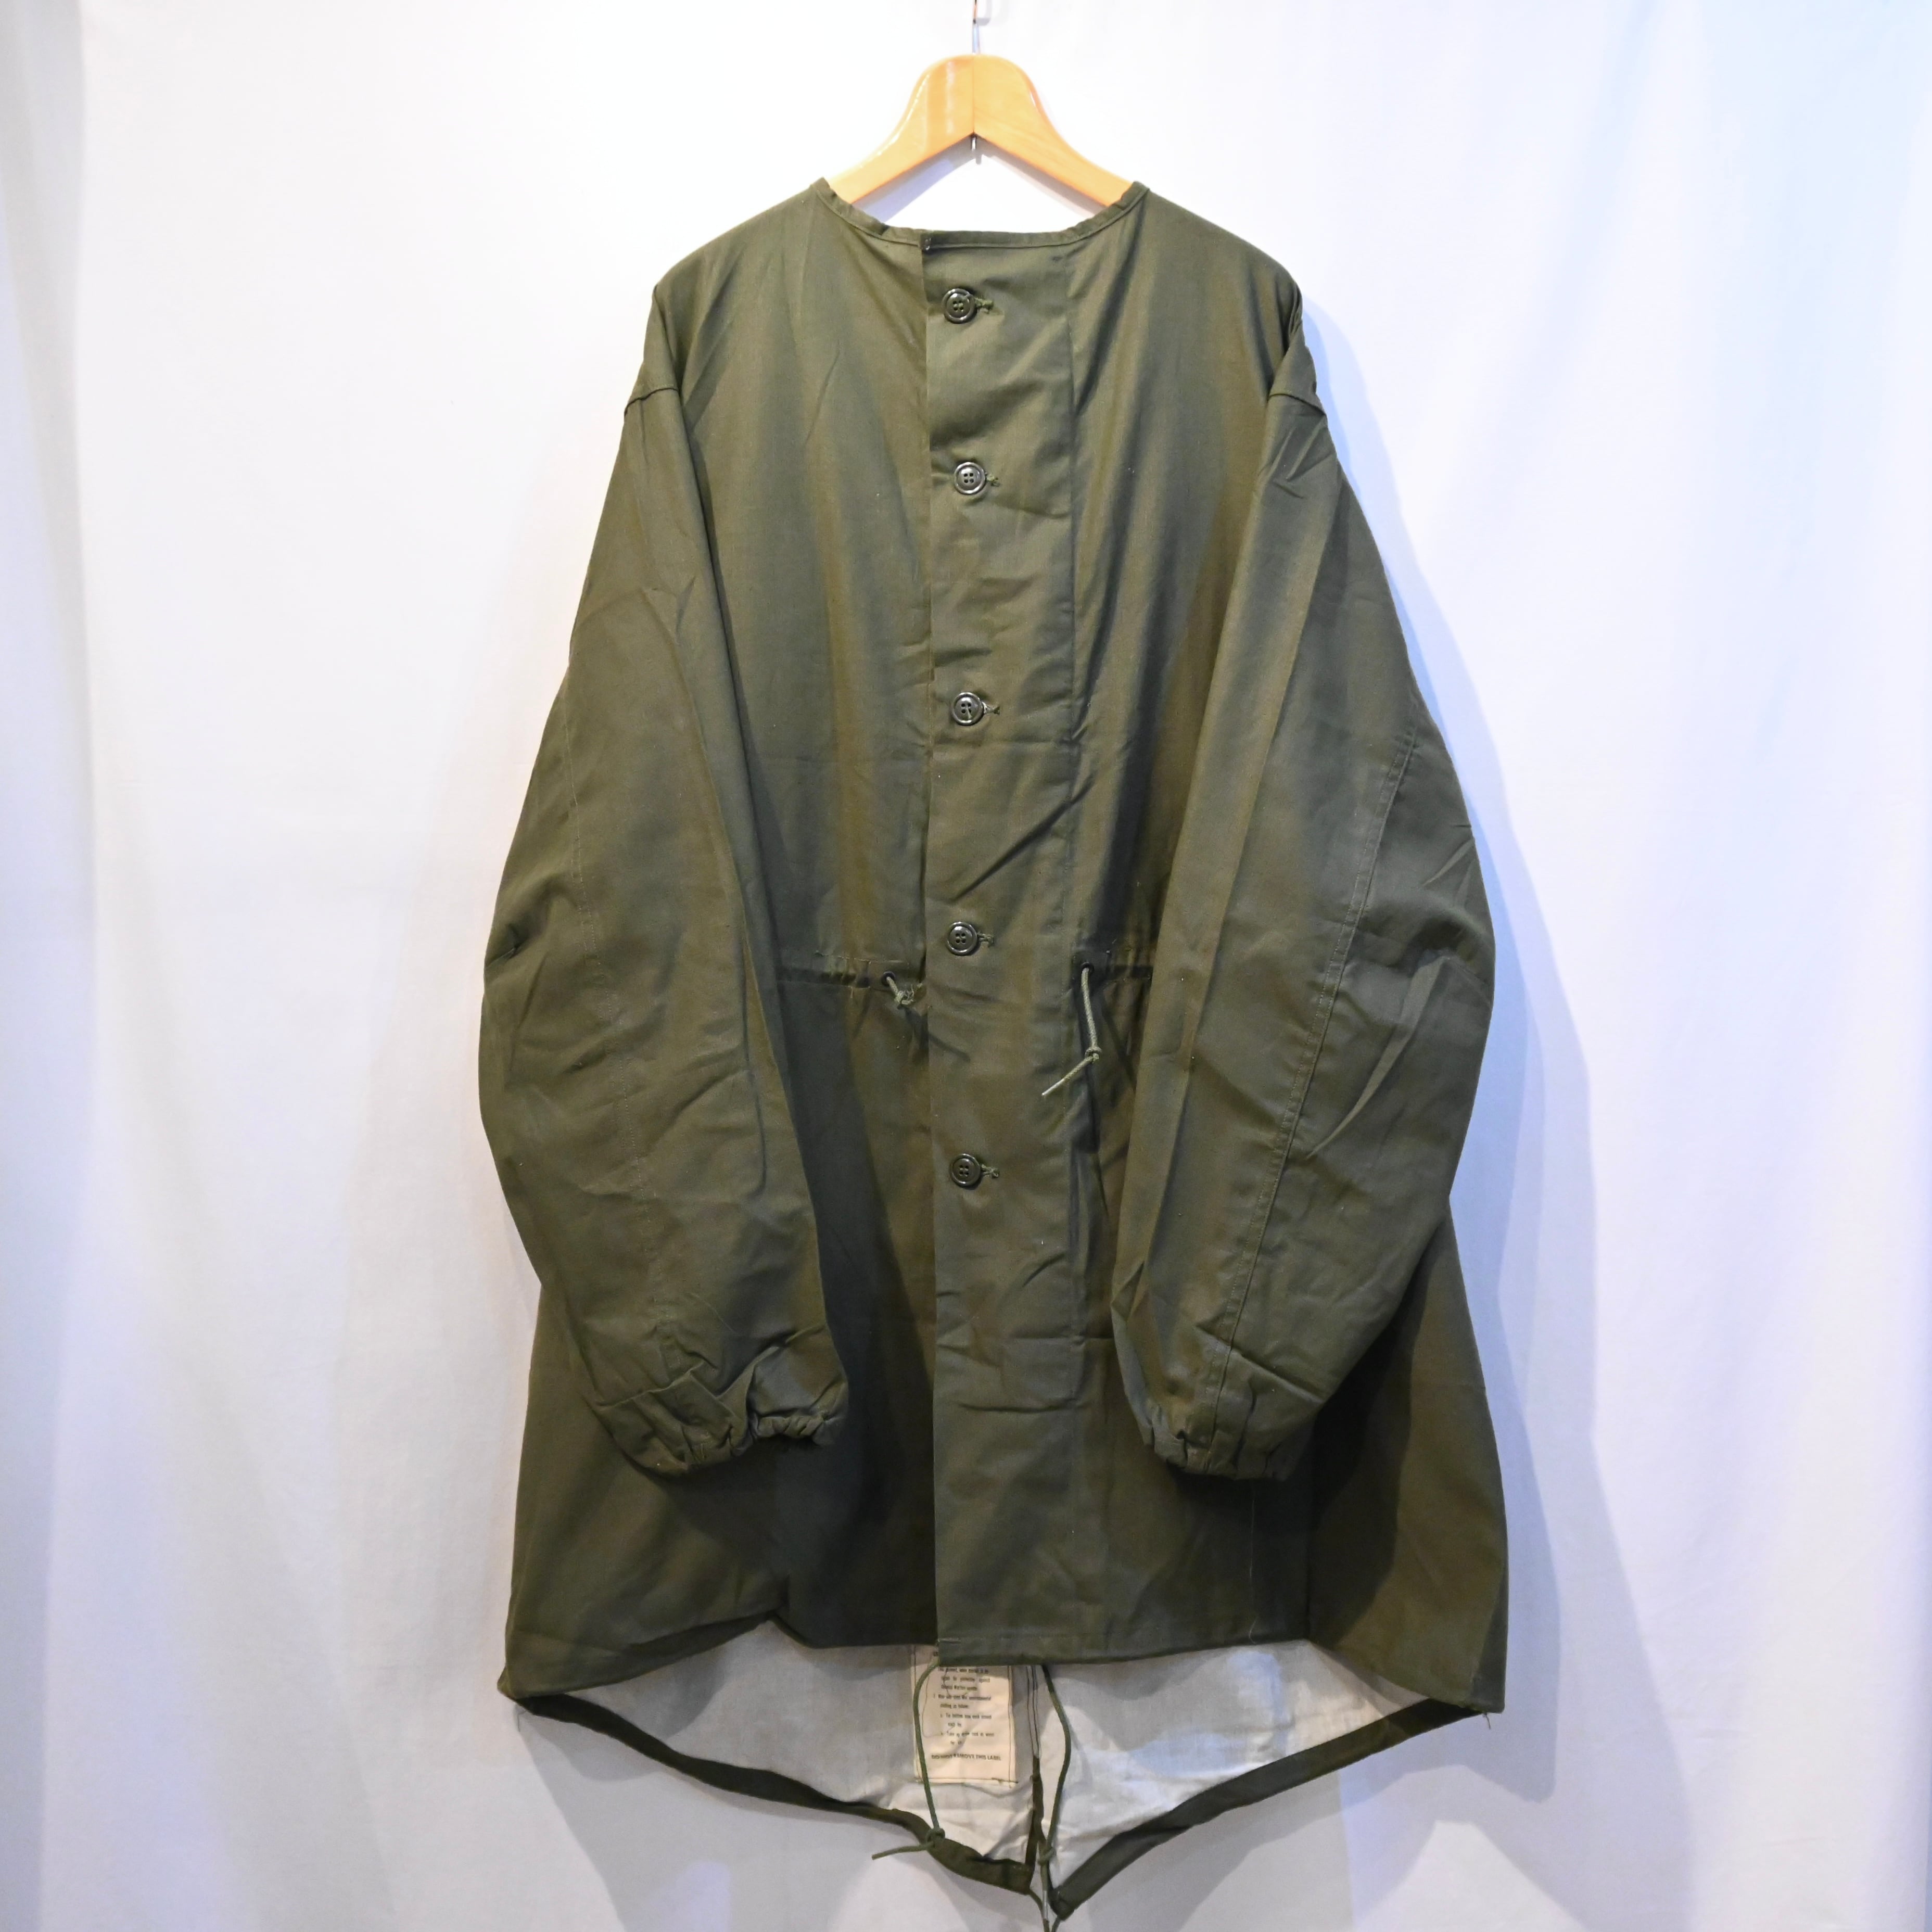 60's Deadstock U.S.Army gas protective coat アメリカ軍 ガスプロテクティブコート デッドストック |  CROUT SAKAE